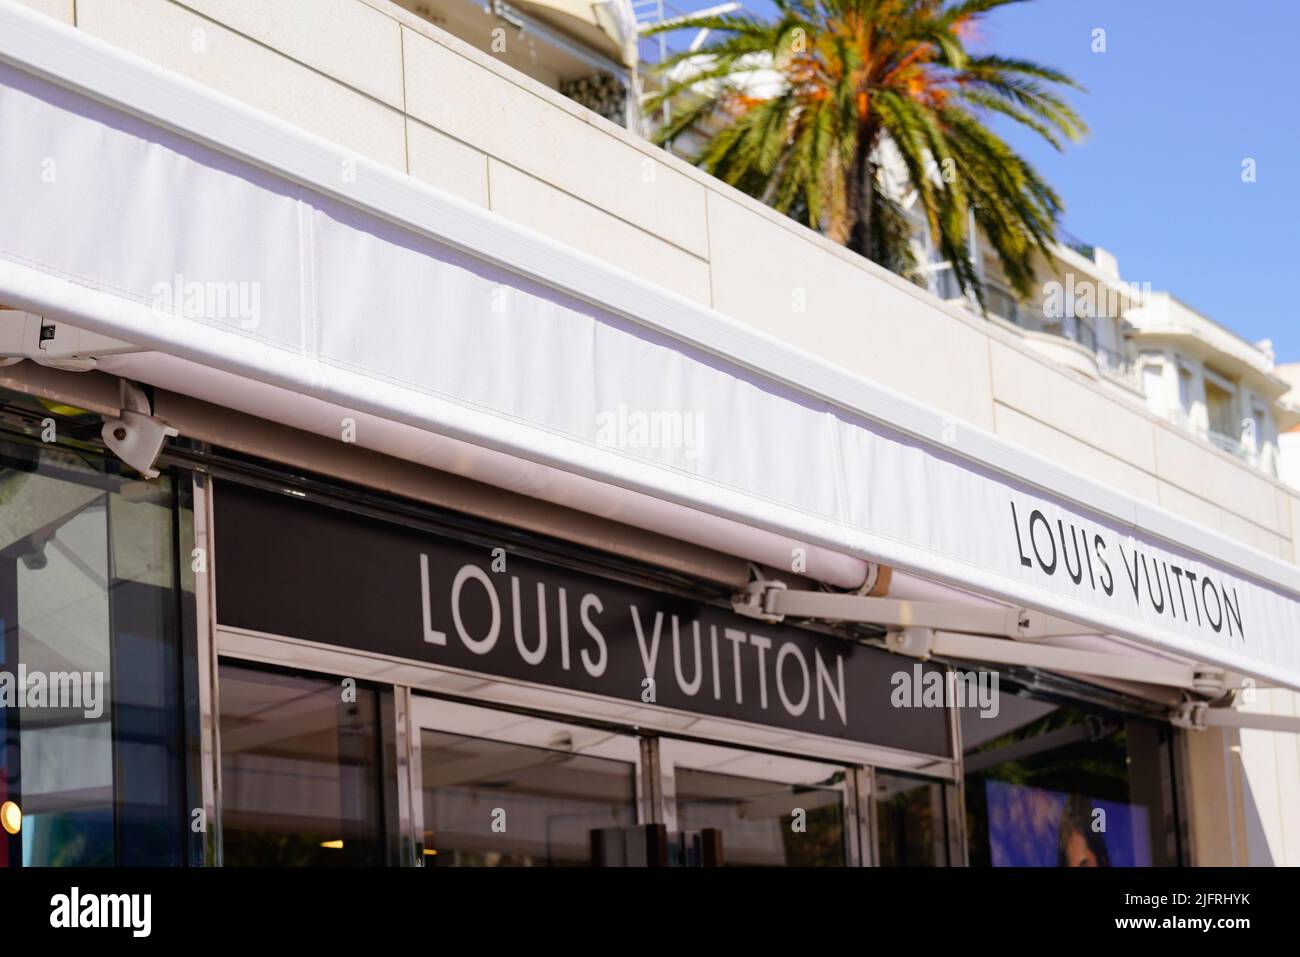 Cannes , paca  France - 06 15 2022 : Louis Vuitton logo sign and brand text shop entrance facade French luxury fashion house store Stock Photo